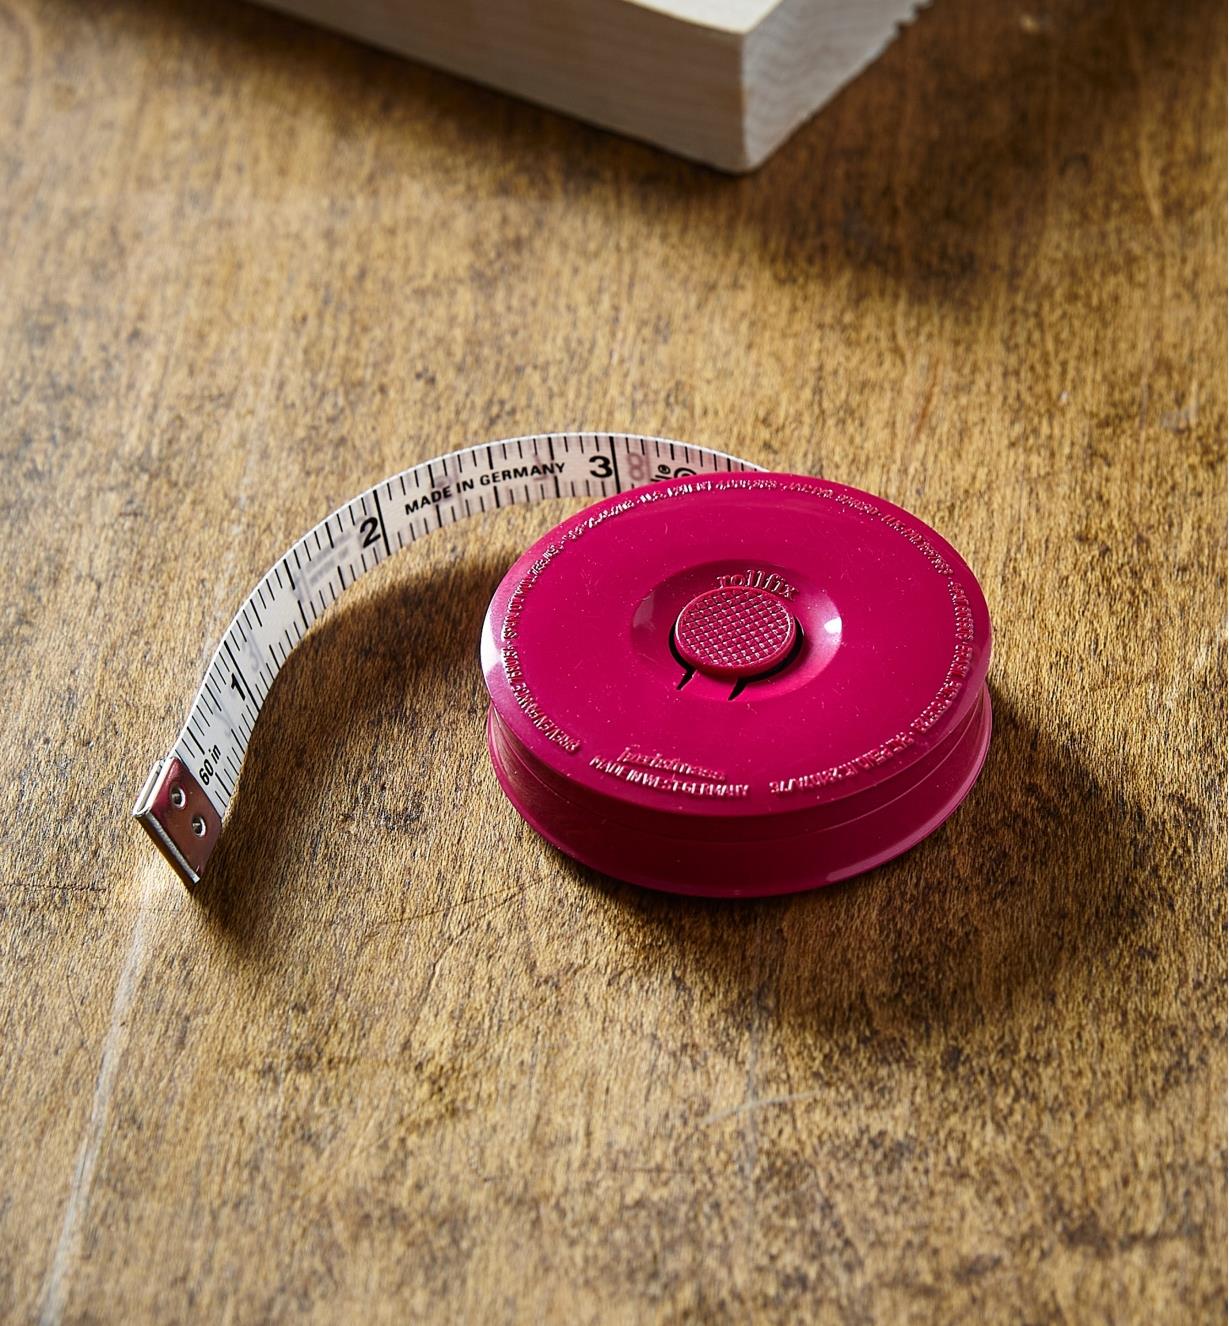 A pocket tape measure with three inches of tape unspooled